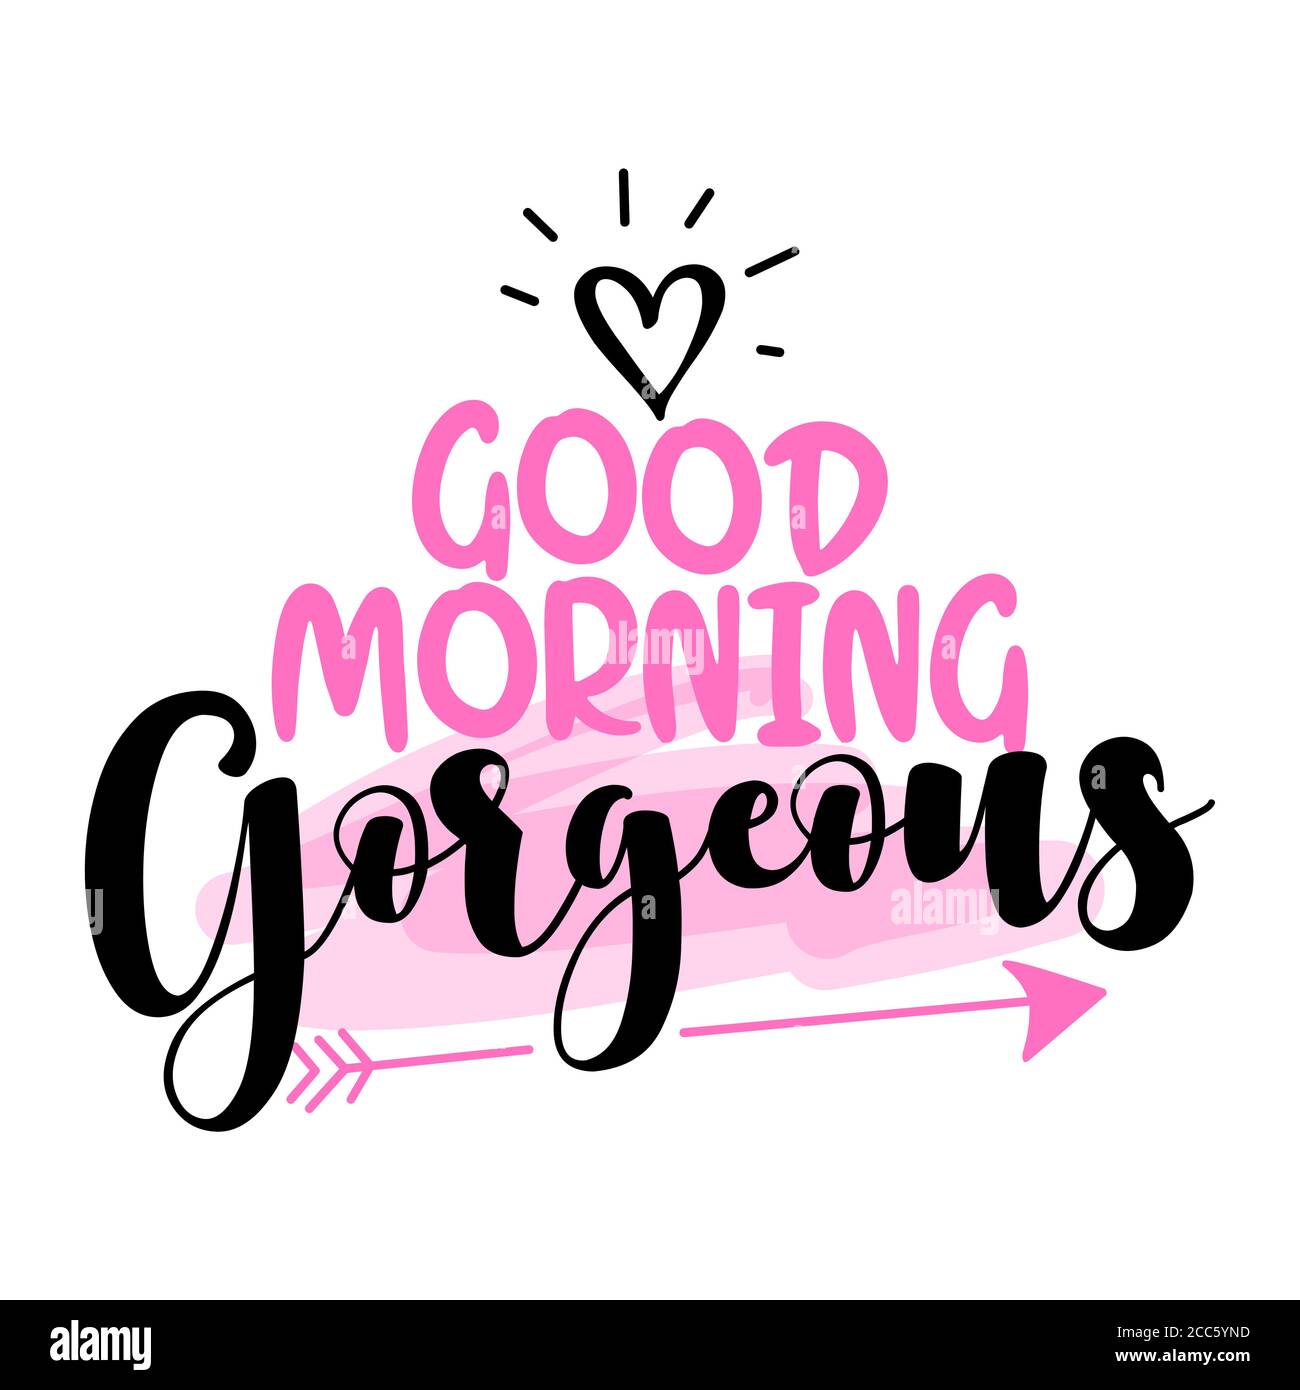 Good Morning Gorgeous - inspirational lettering design for posters ...